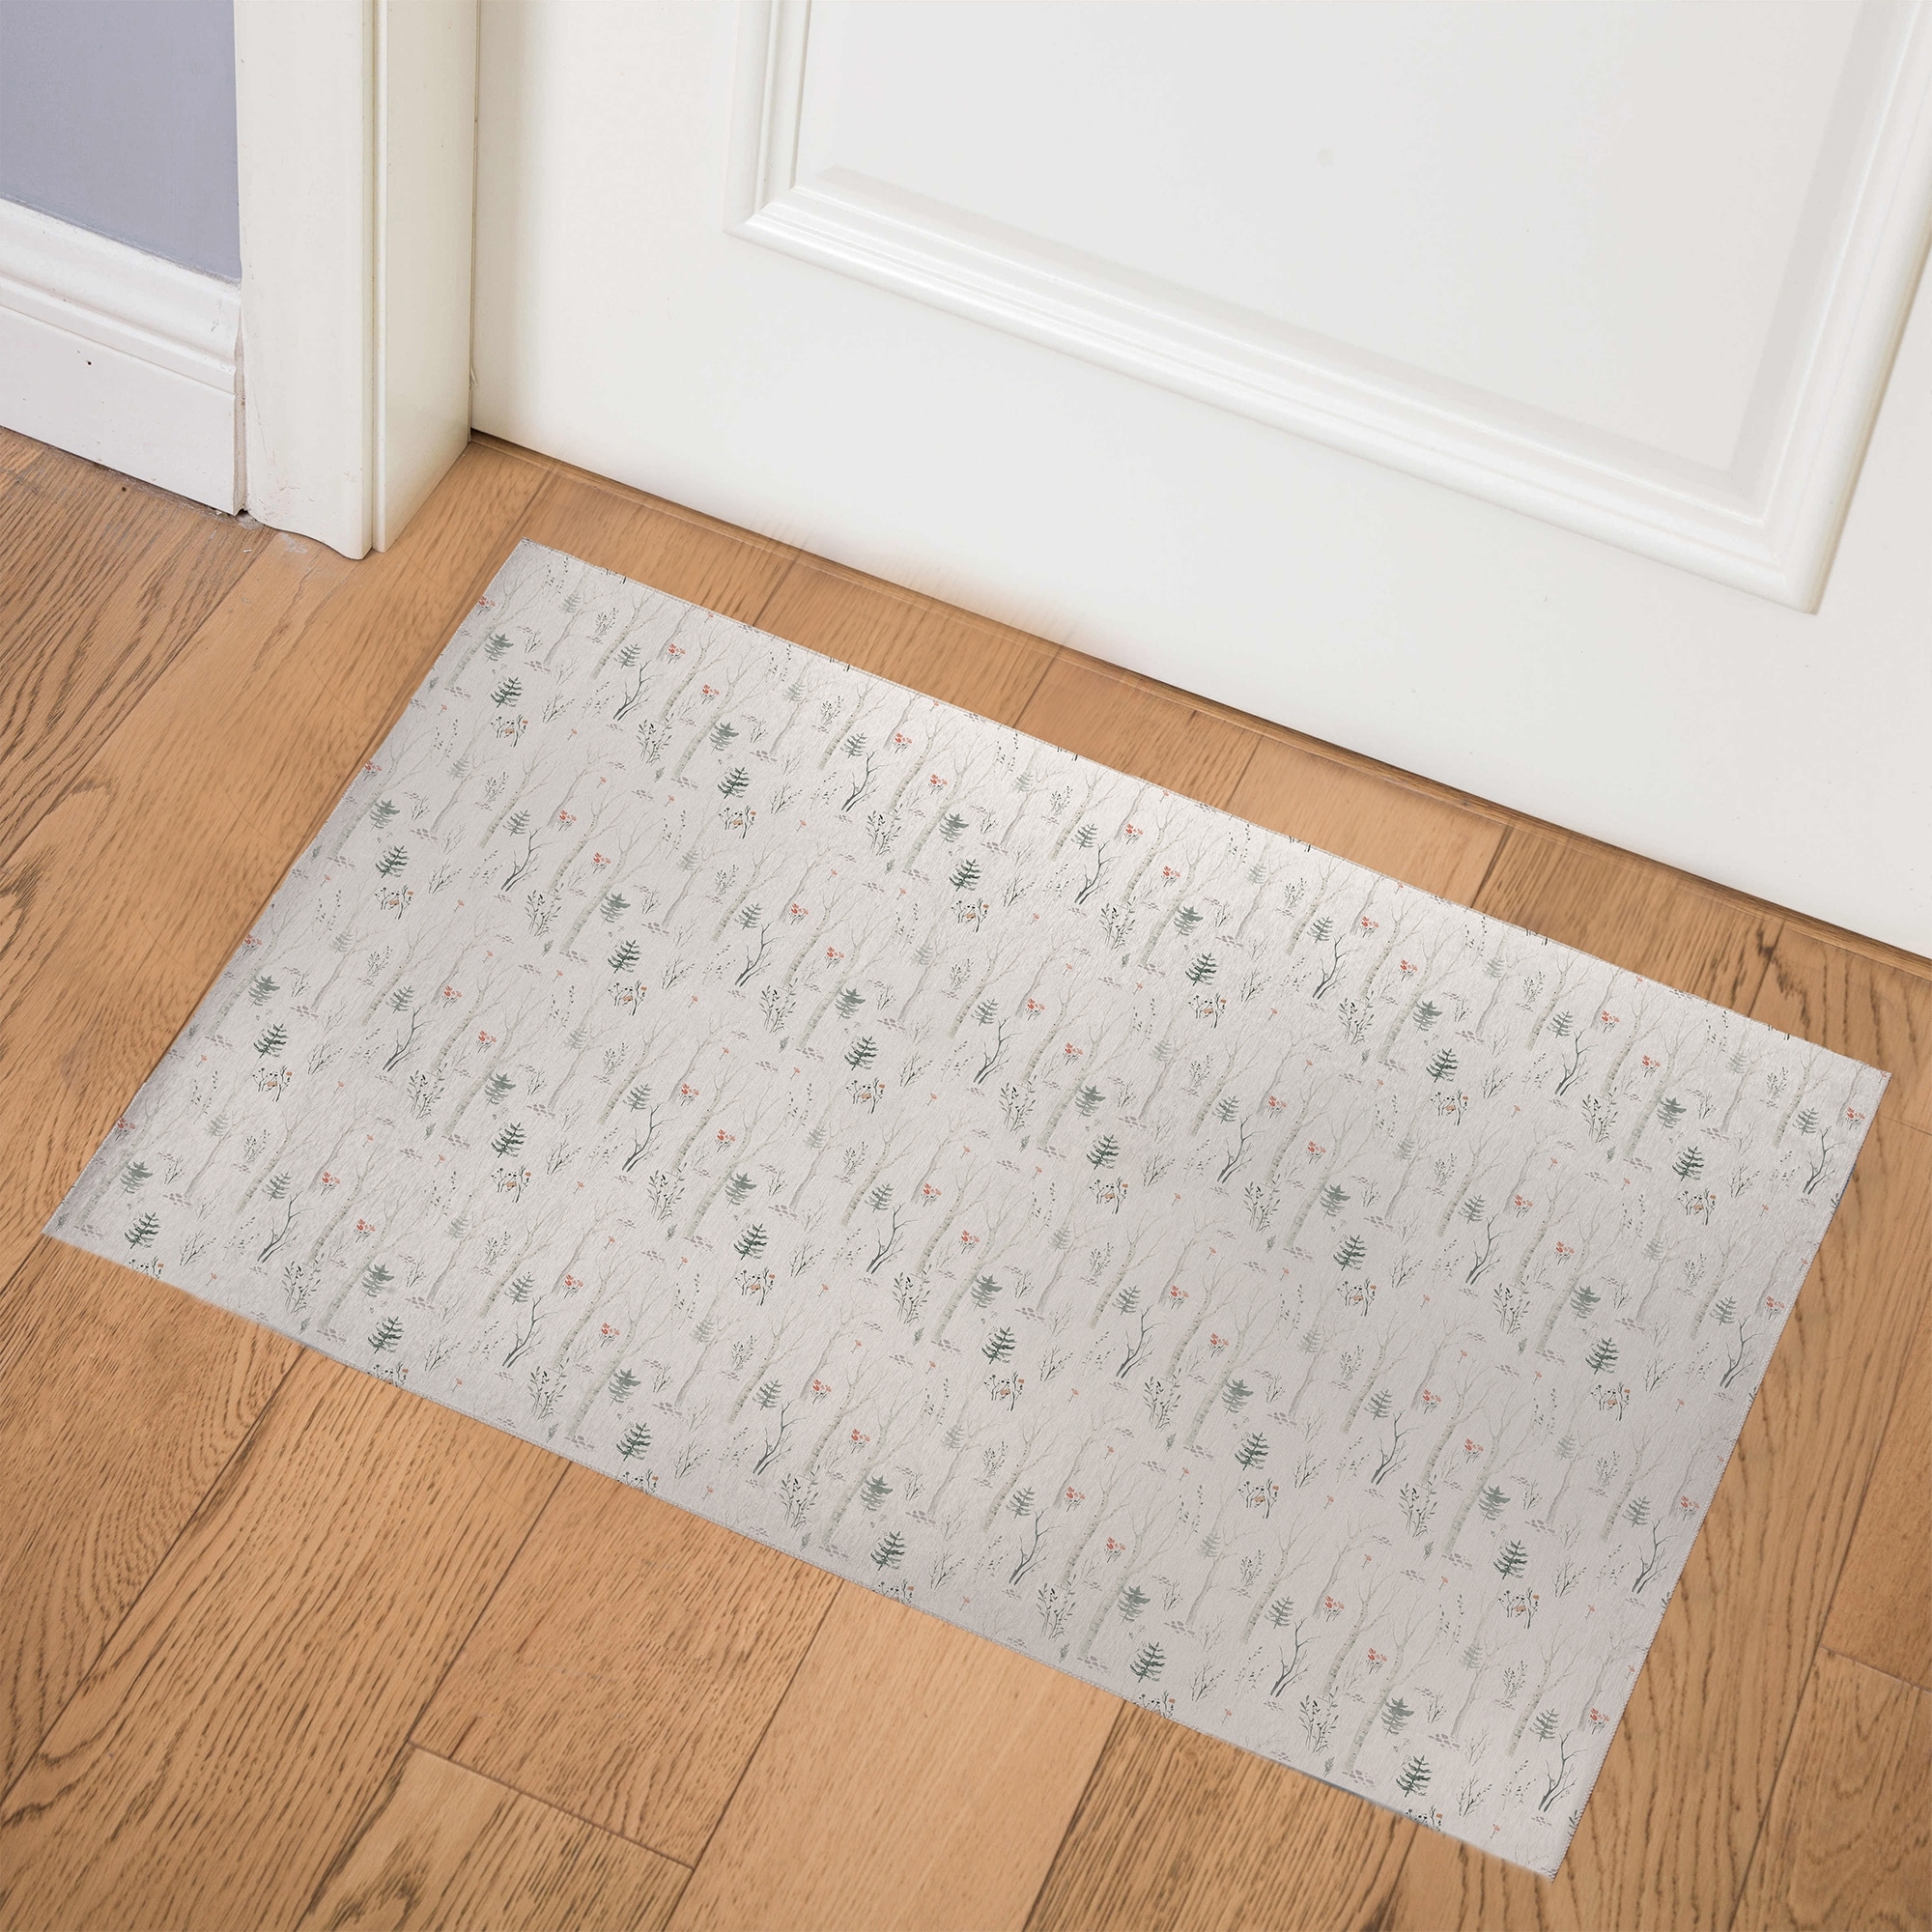 https://ak1.ostkcdn.com/images/products/is/images/direct/57bbf448382d3609d4232e33541ab06300e1864f/WINTER-WOODS-Indoor-Floor-Mat-By-Kavka-Designs.jpg